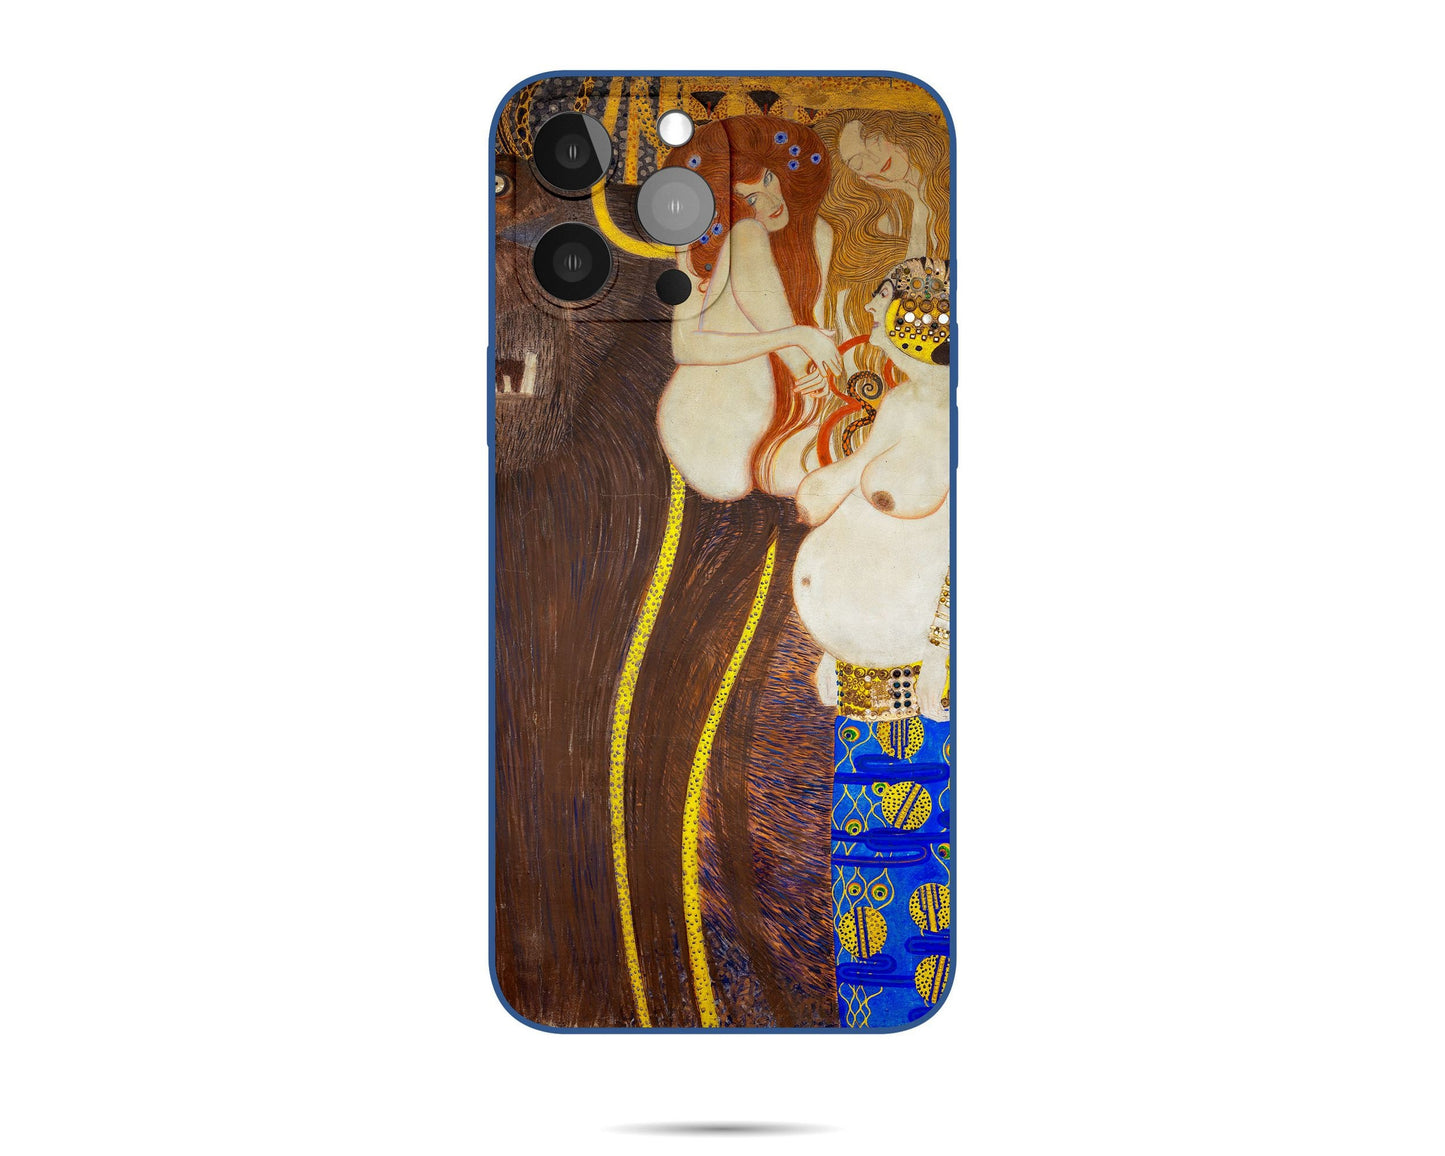 Iphone Case Of Gustav Klimt Painting Beethoven Frieze-The Hostile Powers, Iphone 12 Pro Case, Iphone 7 Case, Aesthetic Iphone, Gift For Her